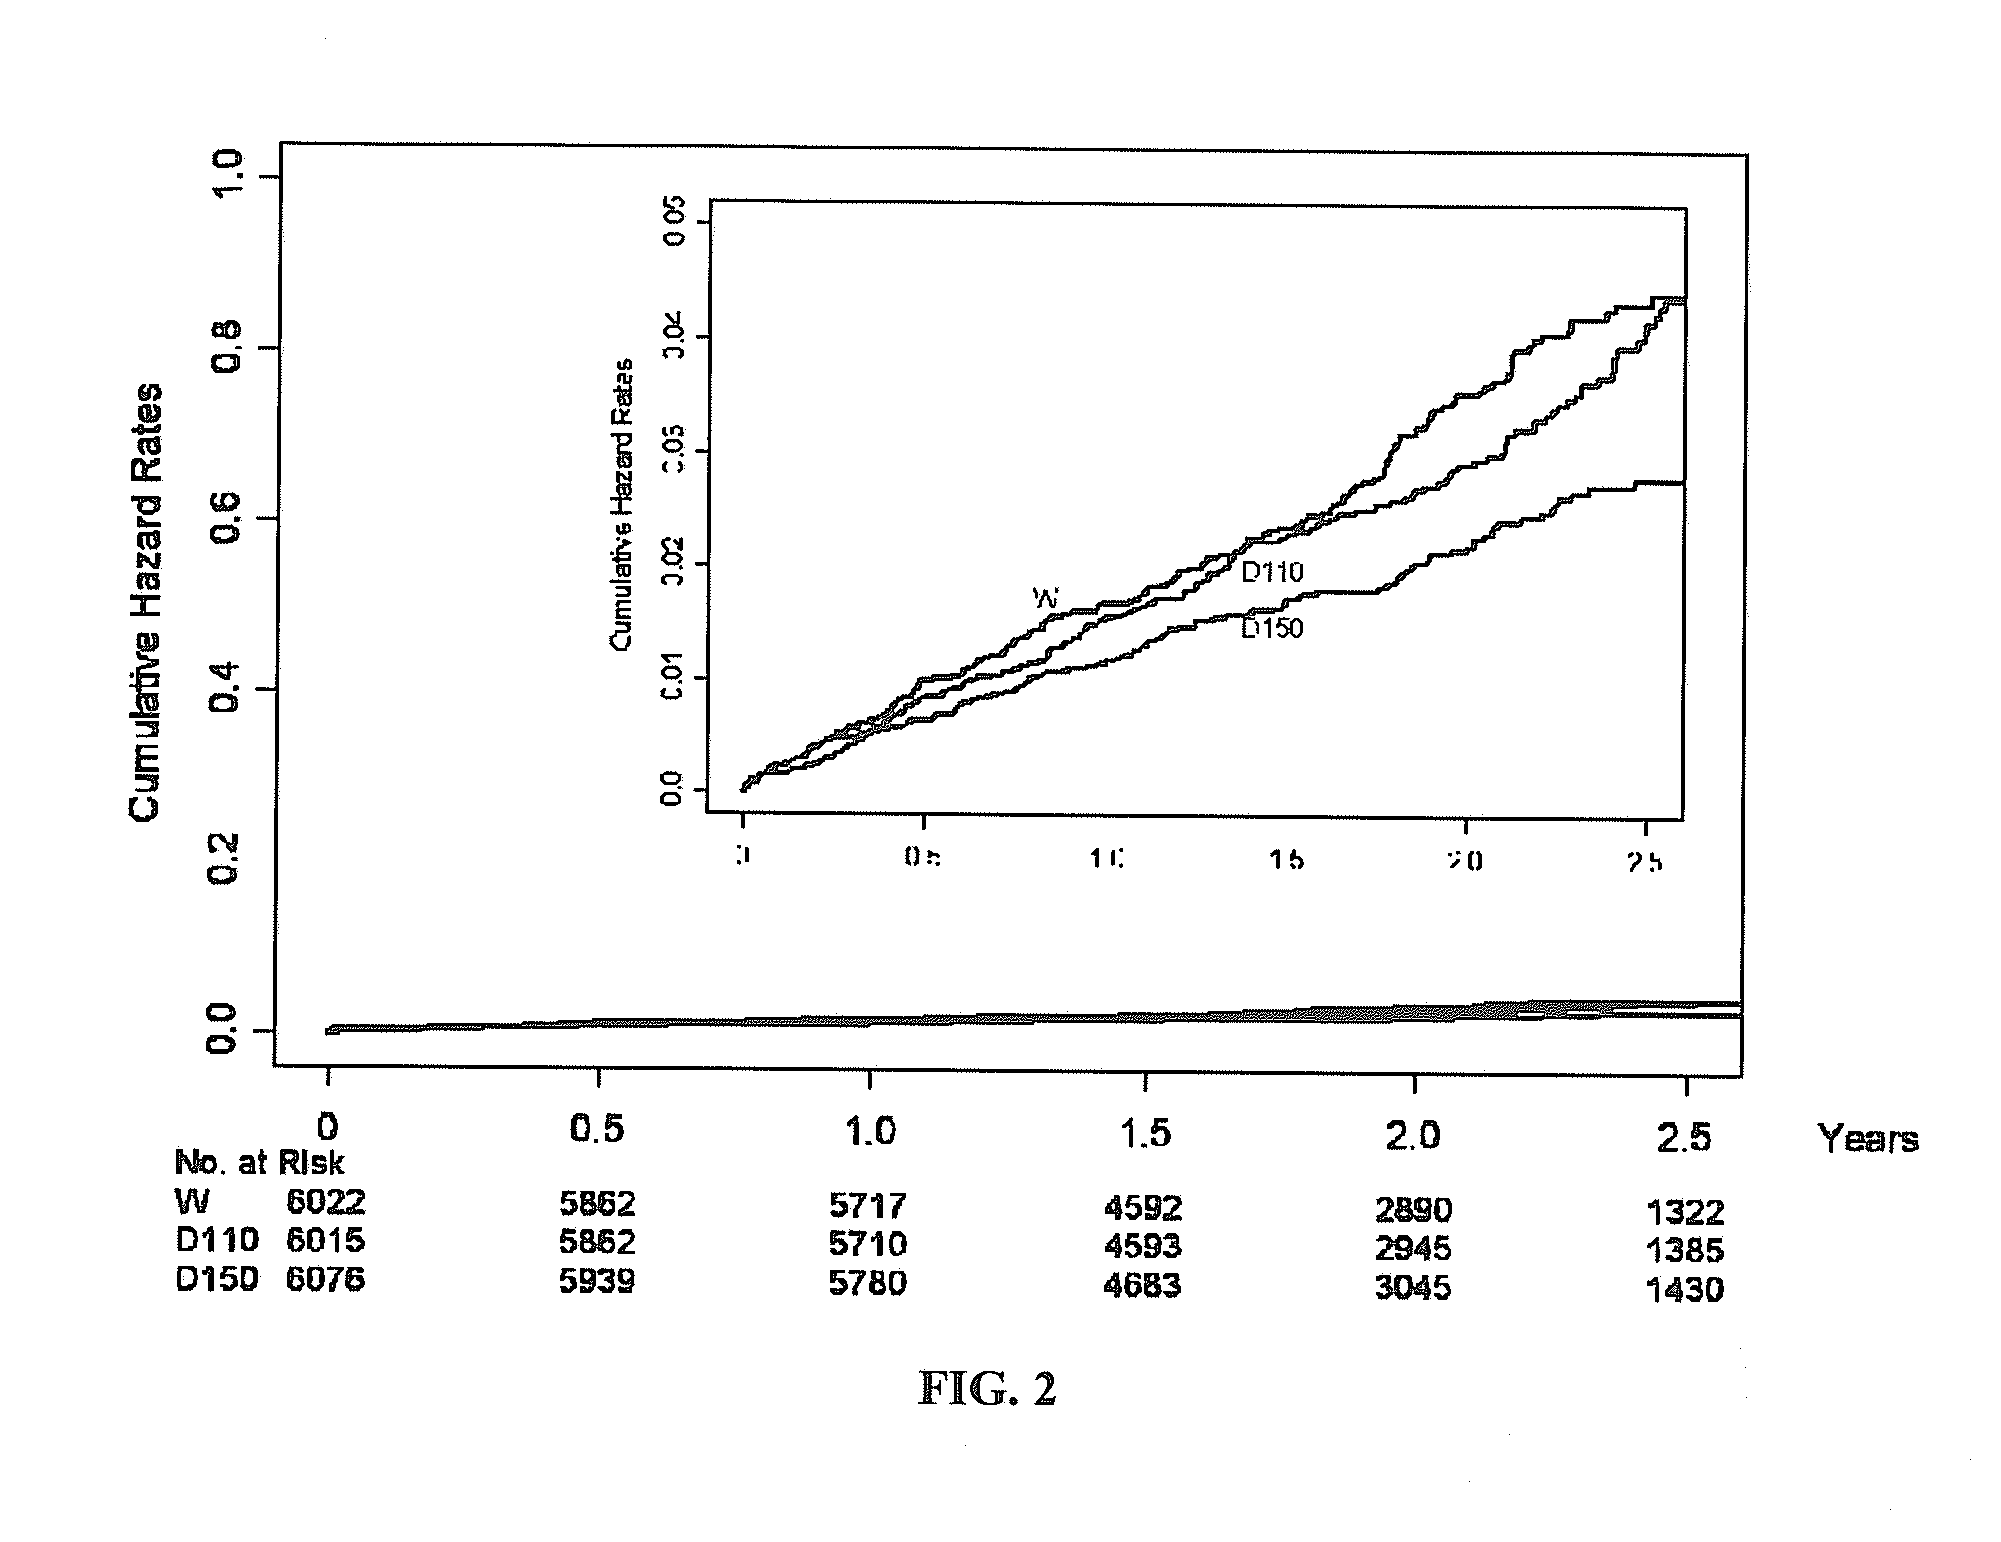 Method for treating or preventing thrombosis using dabigatran etexilate or a salt thereof with improved efficacy over conventional warfarin therapy